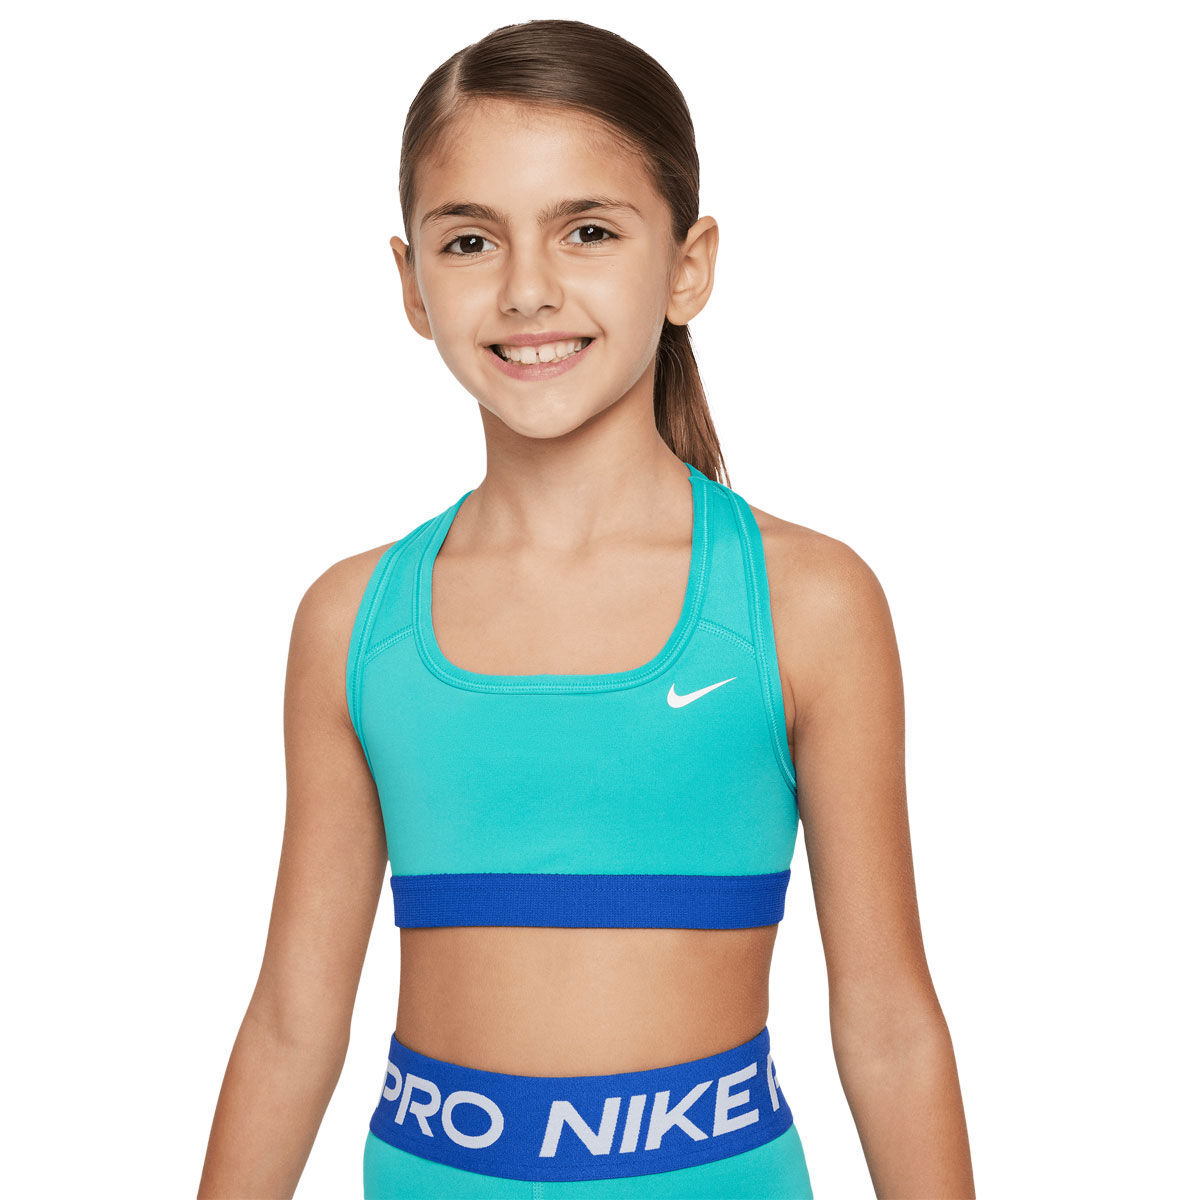 Nike Sports Bras for sale in Pittsburgh, Pennsylvania